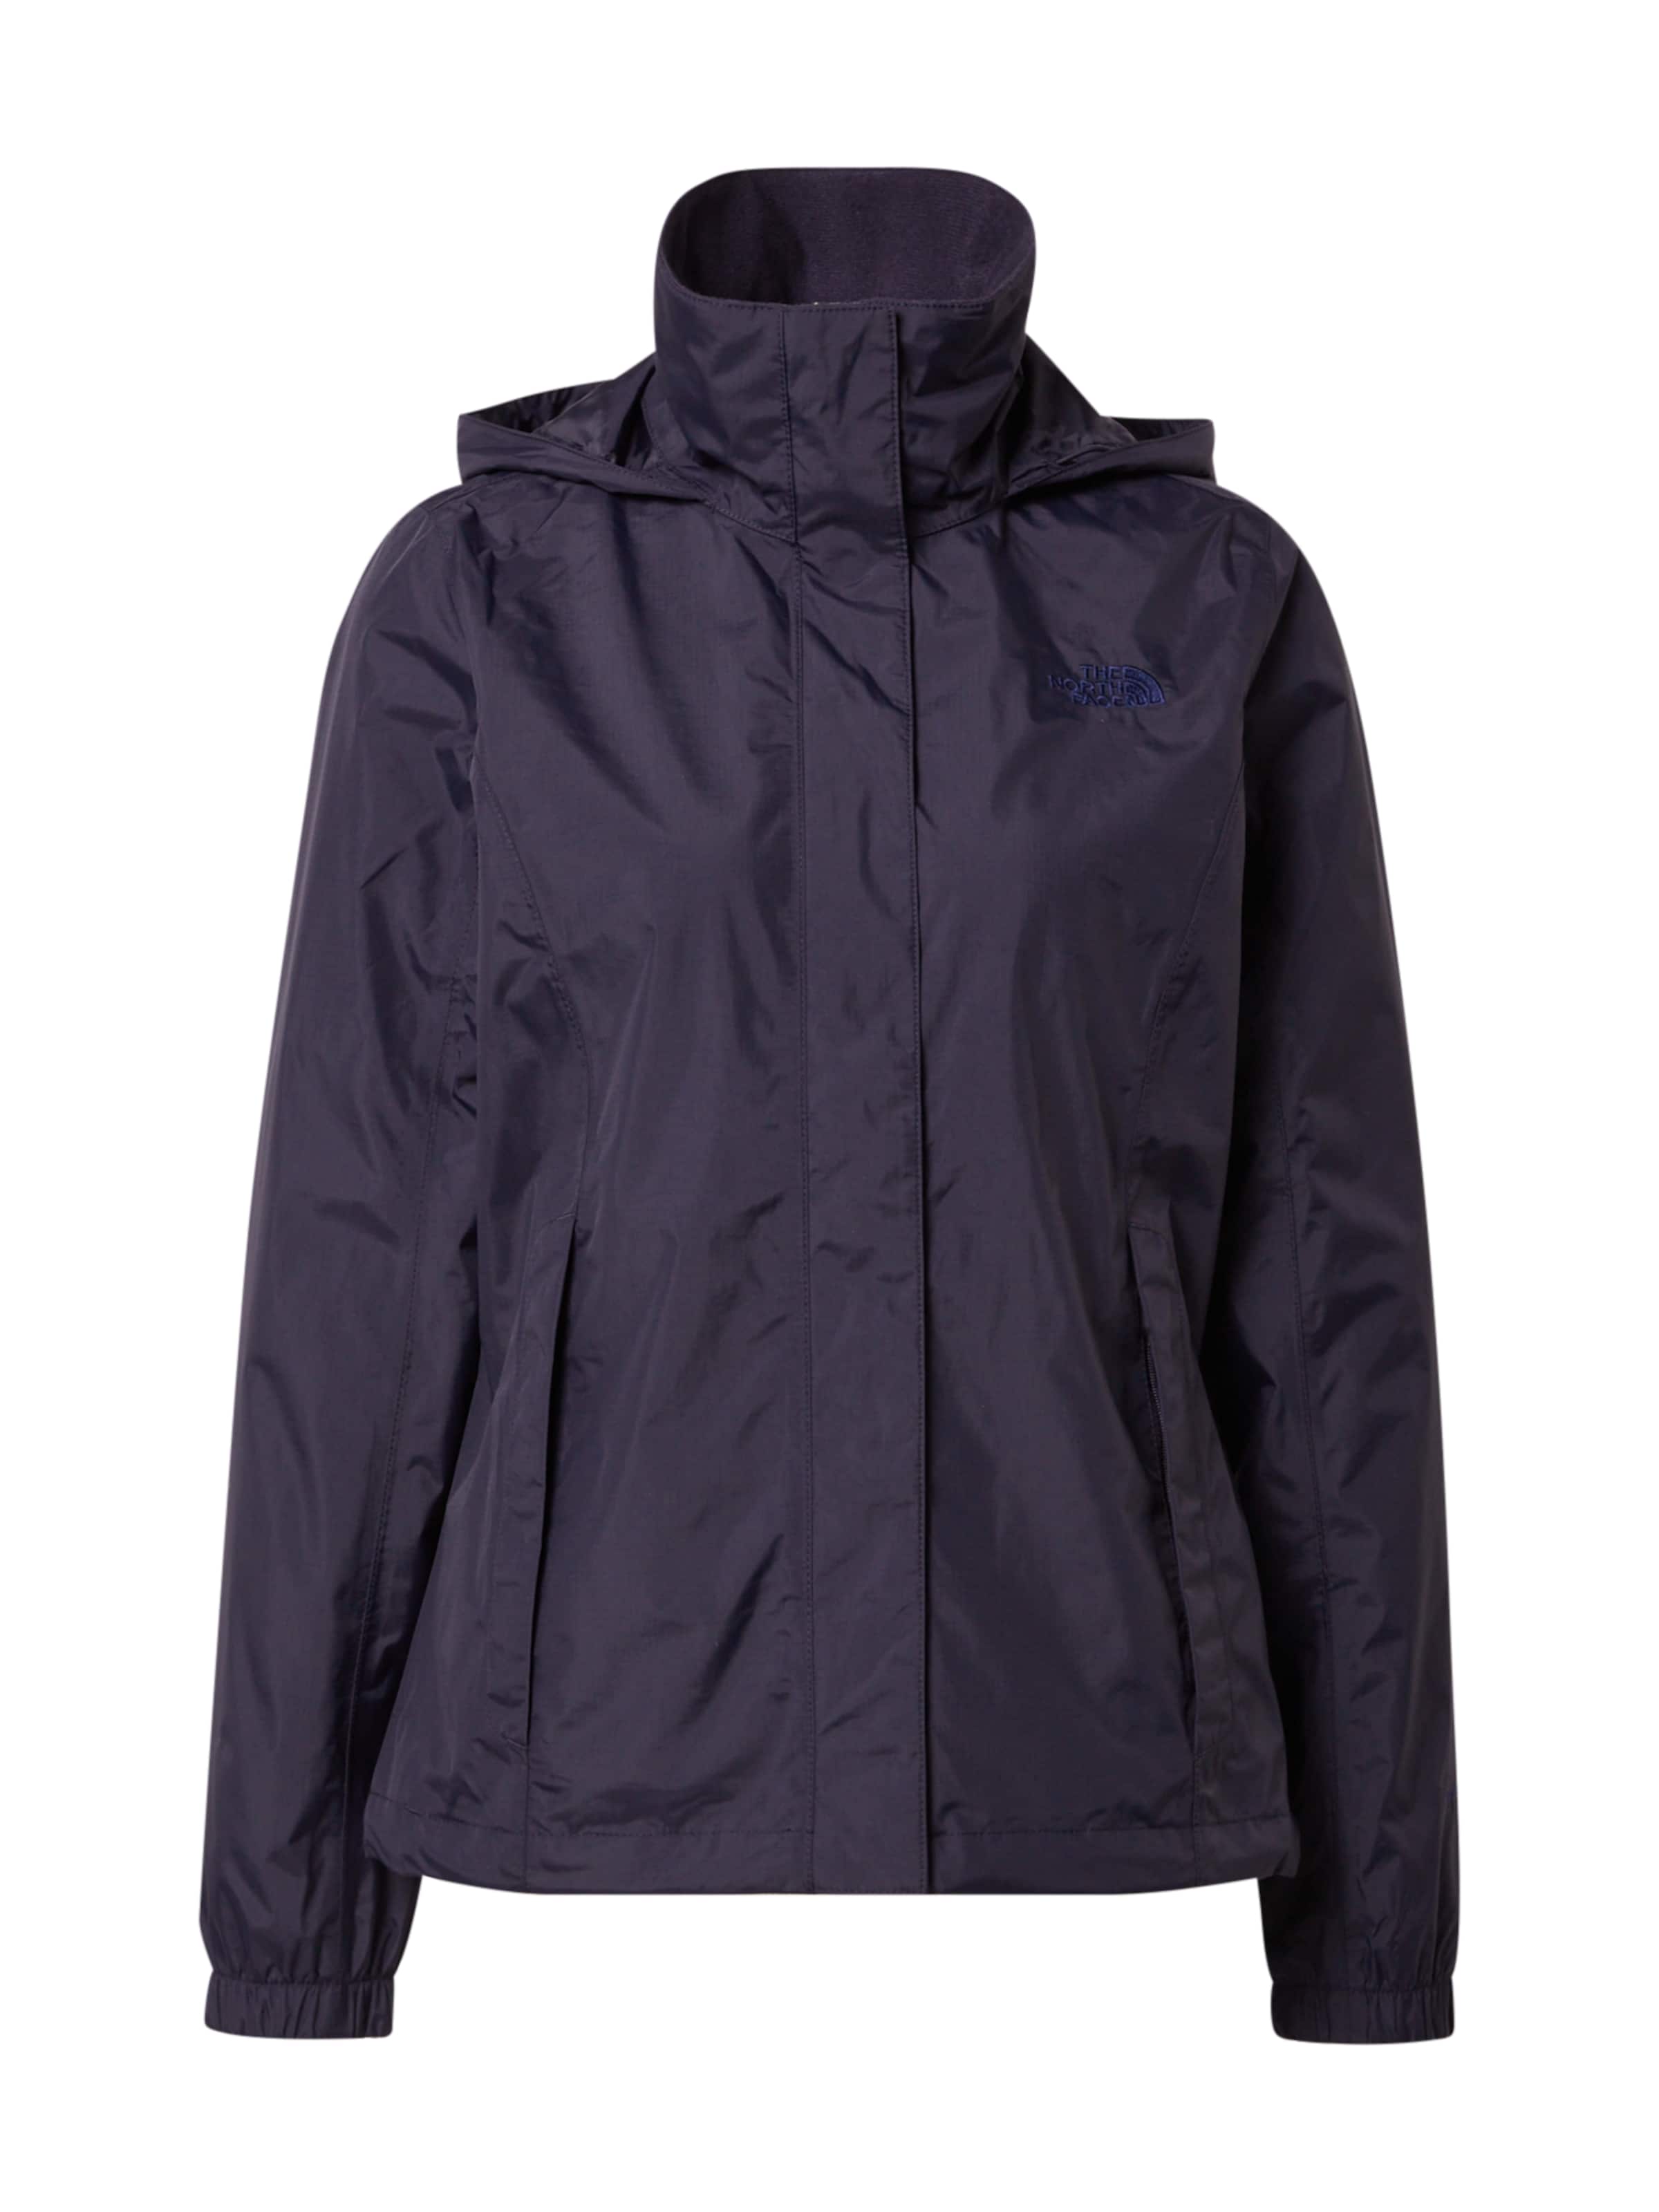 THE NORTH FACE Giacca per outdoor Resolve 2 in Navy, Blu Reale 